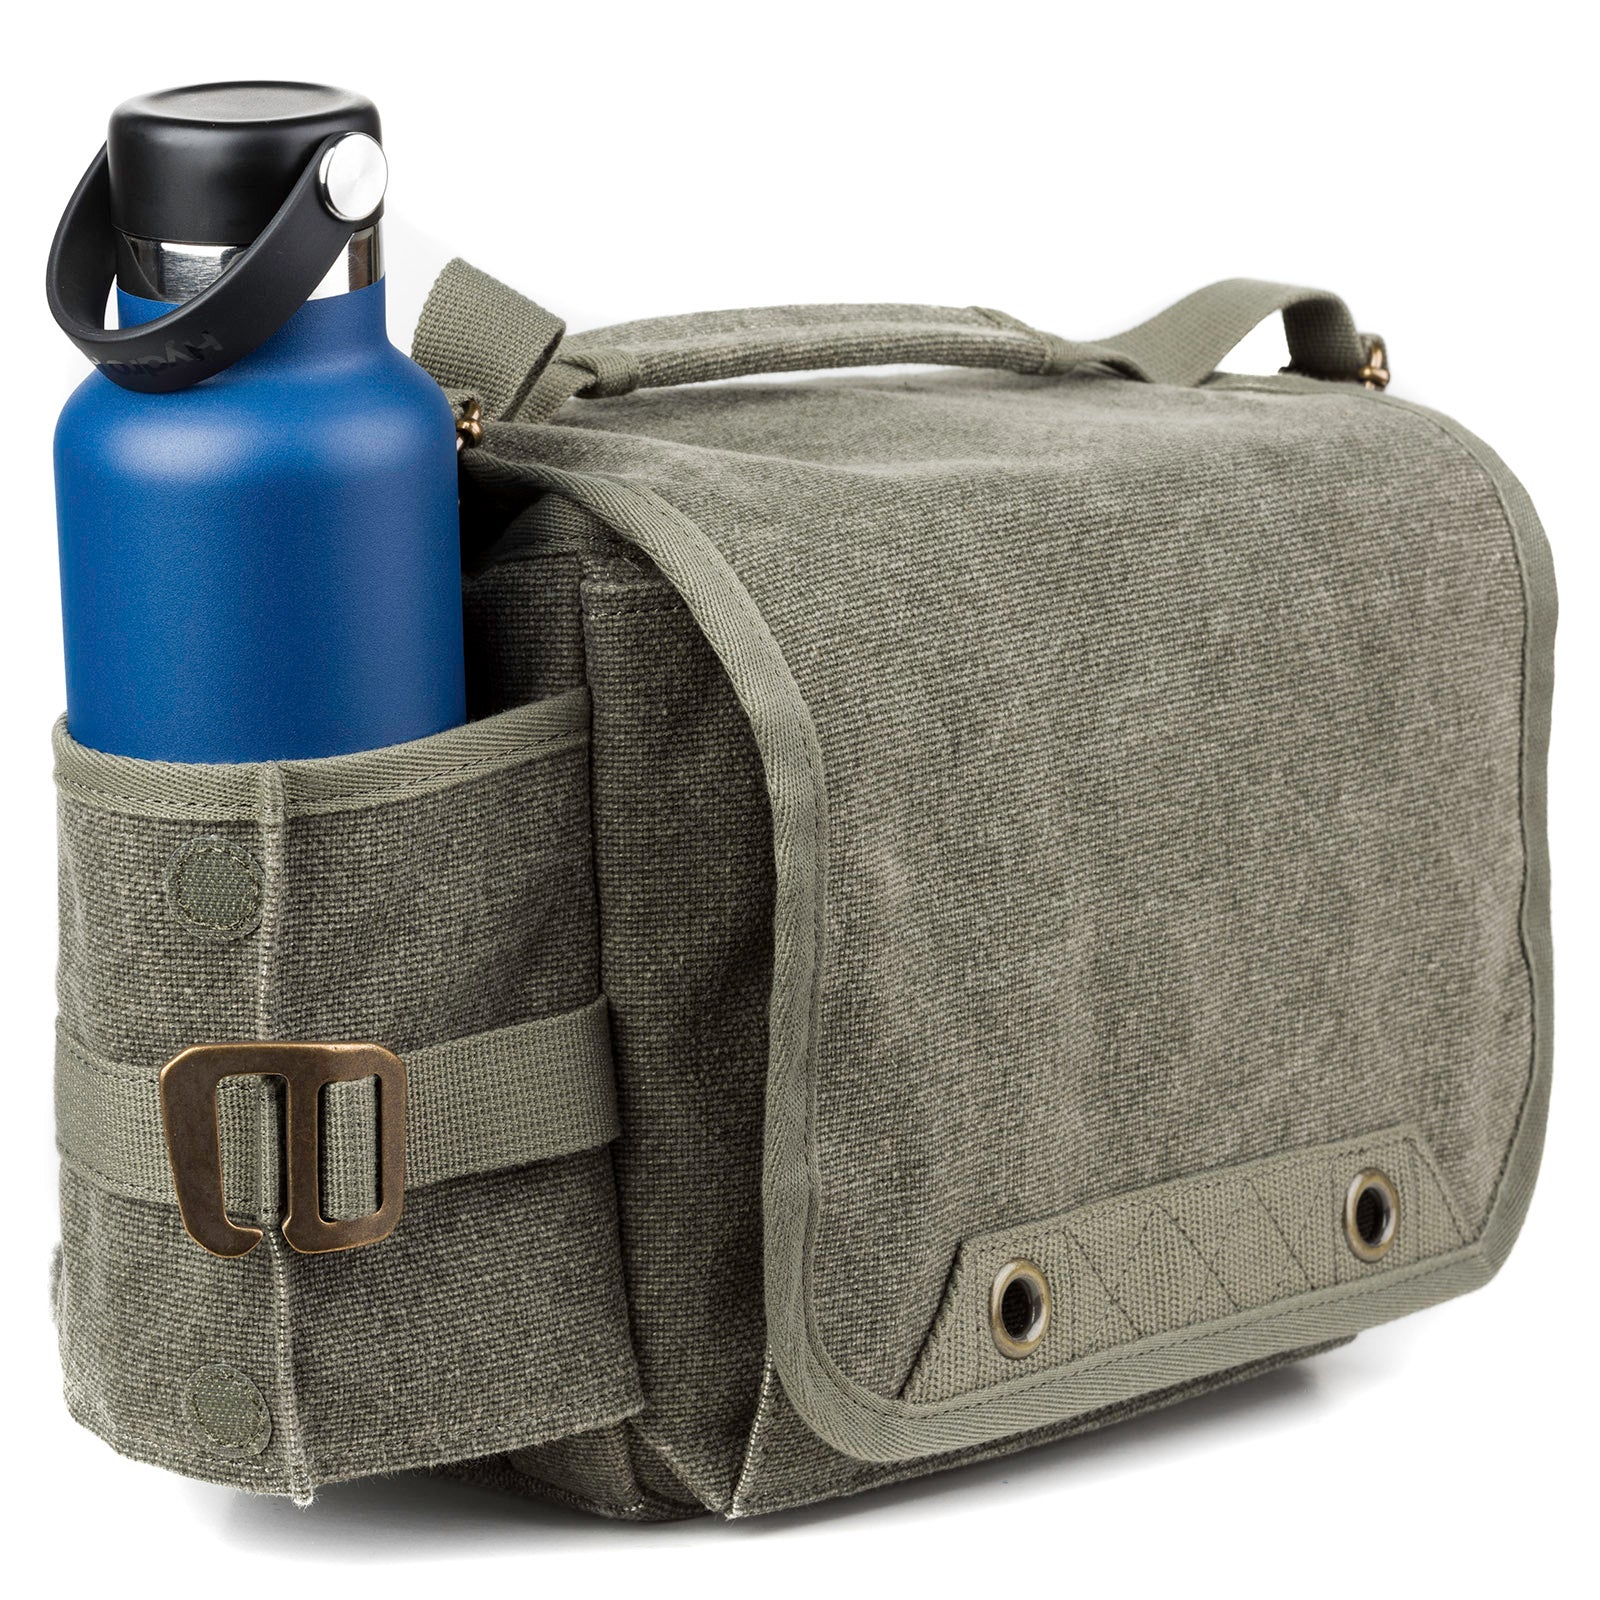 Collapsible water bottle pocket